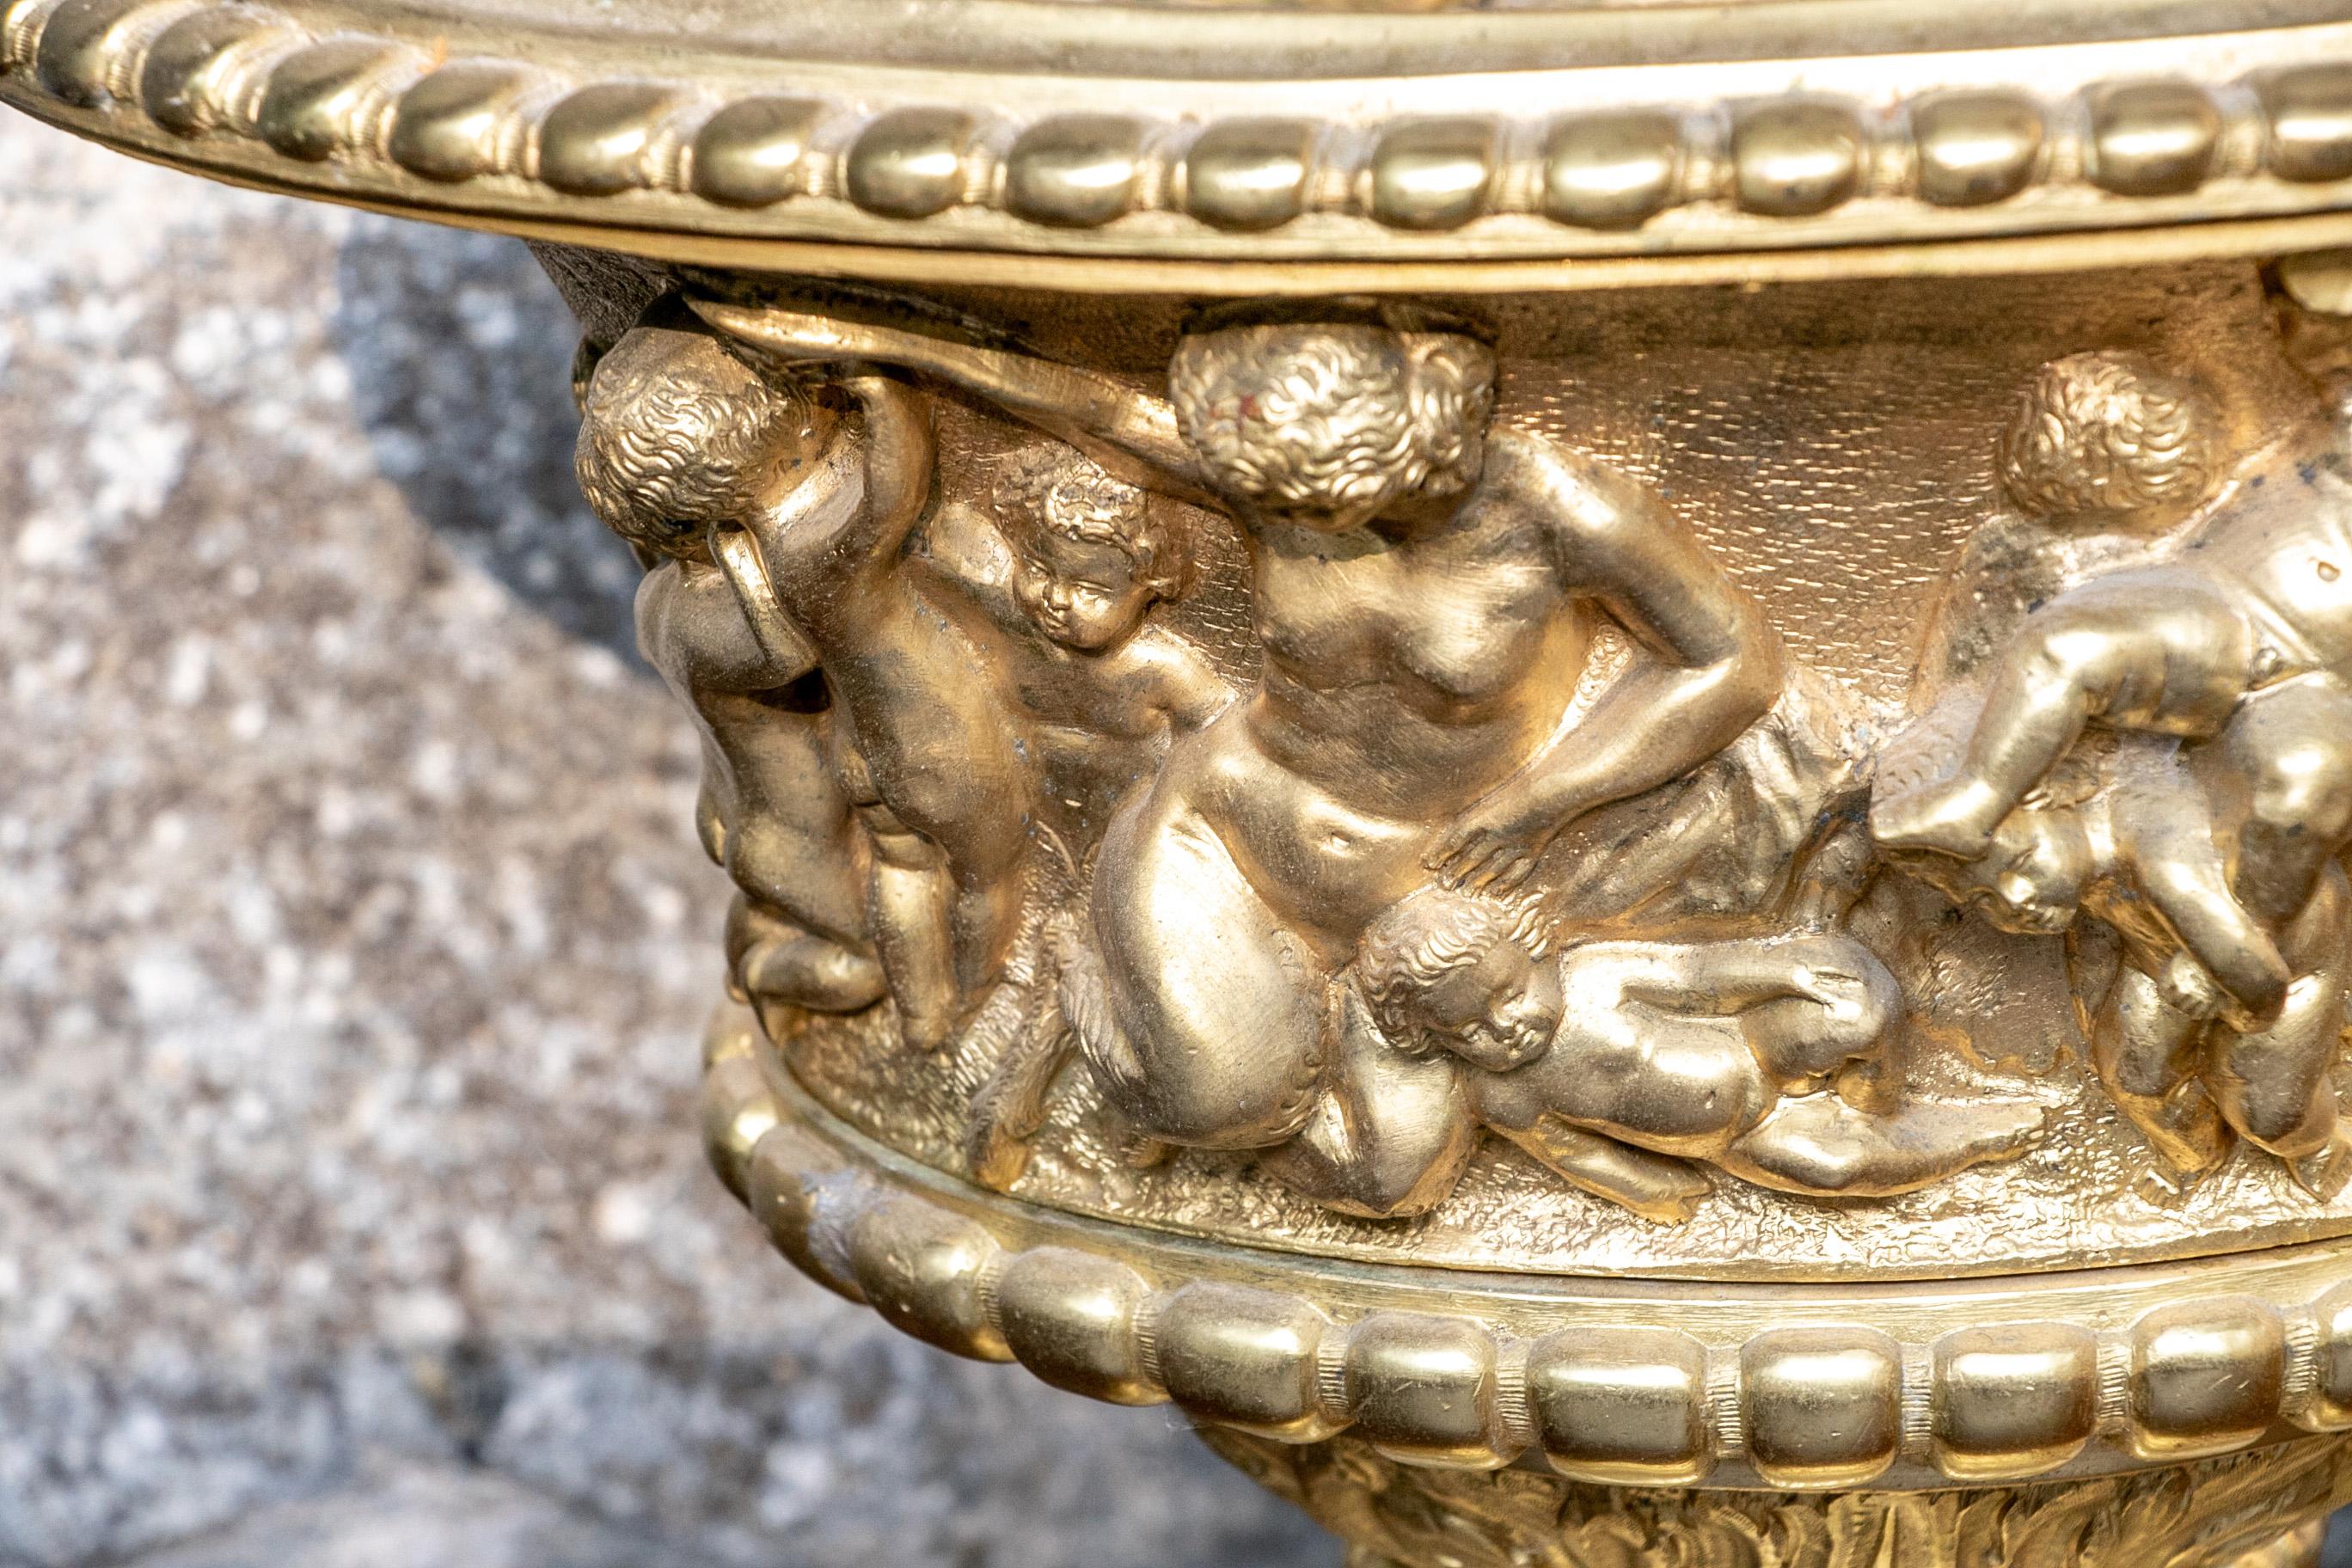 Cast bronze urn form planter, oval urn with high relief decoration with Venus and a troupe of playful putti. The fluted base with a band of grape leaves. A hole in the bottom. Mounted on a tiered brass base. 

Condition: Good condition with some